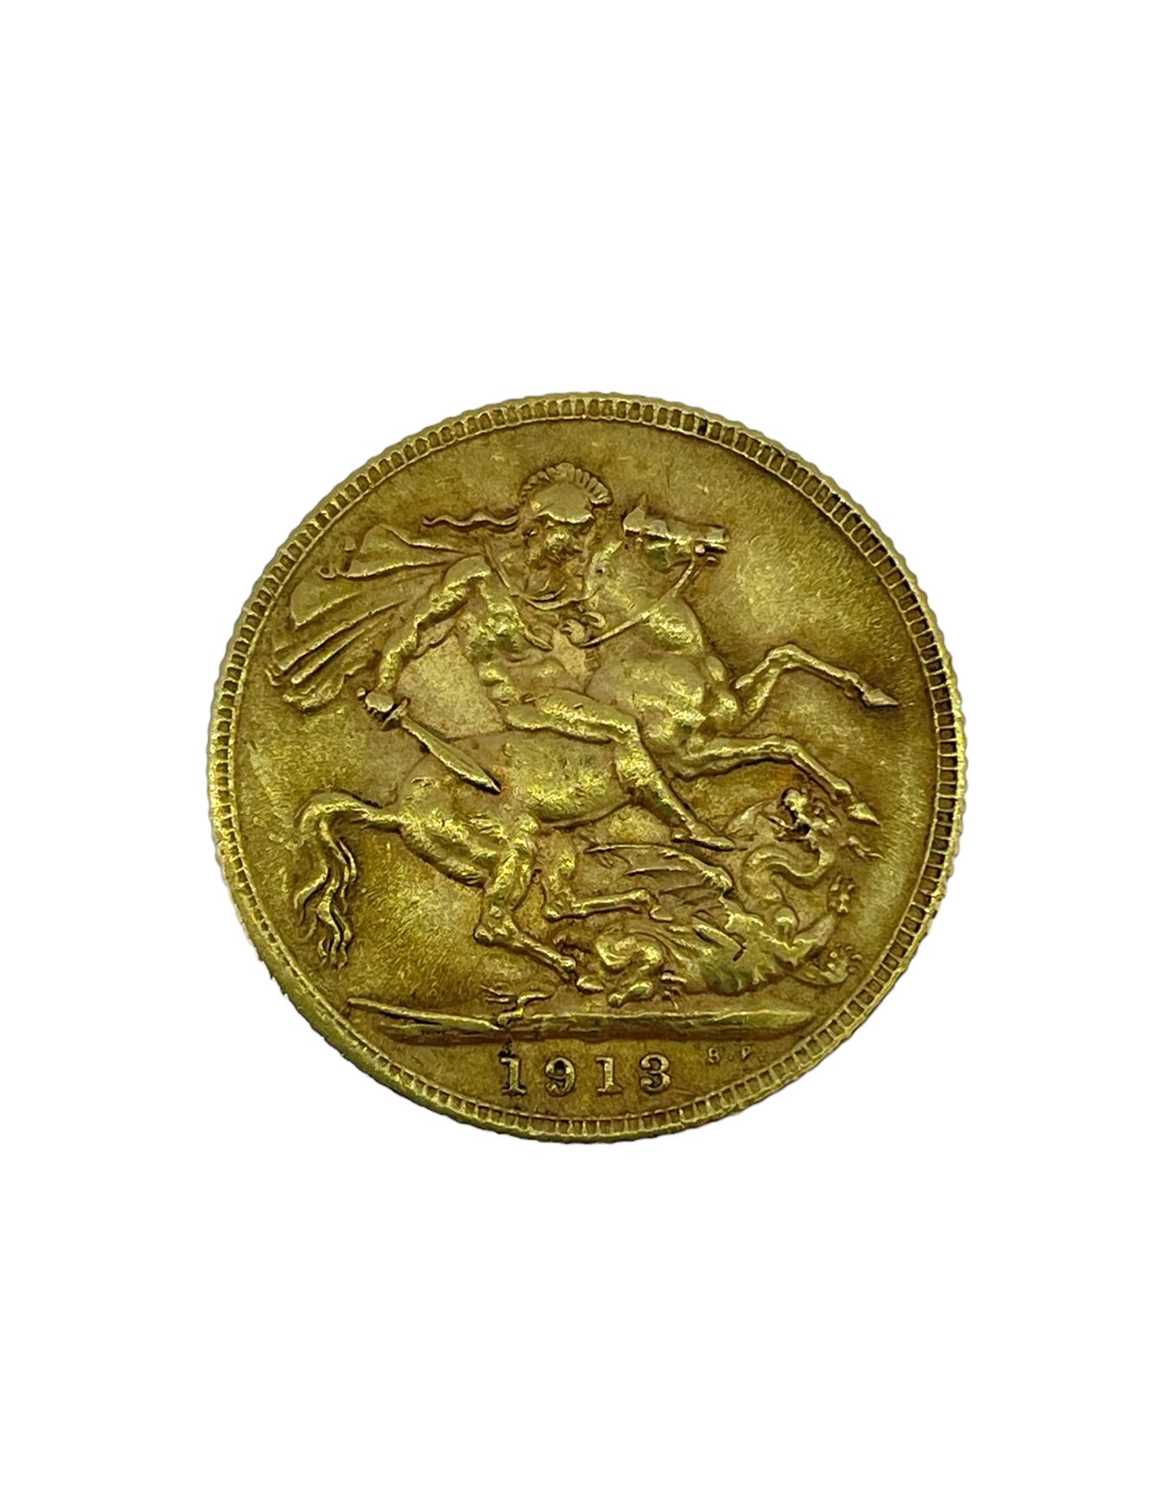 GEORGE V GOLD SOVEREIGN, 1913, 8.0gms Provenance: private collection Carmarthenshire, consigned